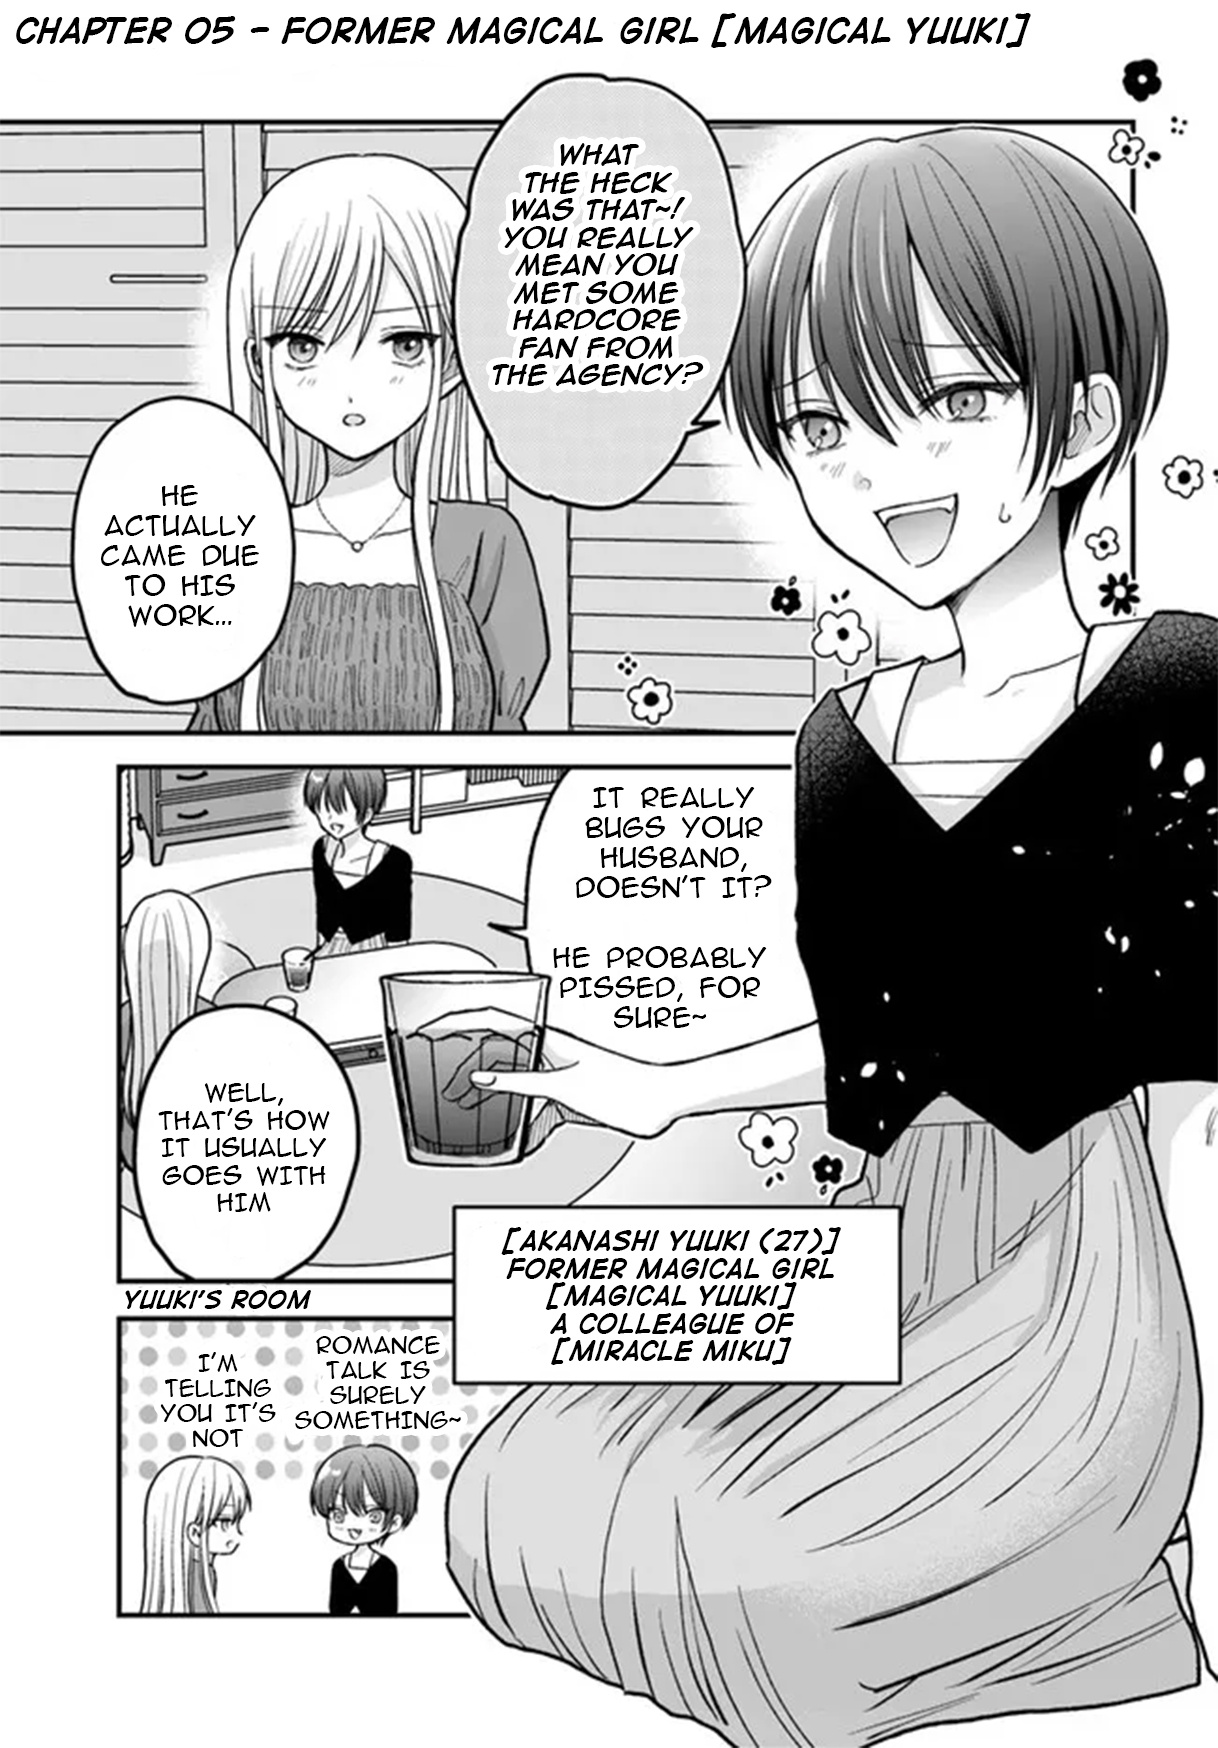 My Wife Could Be A Magical Girl Vol.1 Chapter 5: Former Magical Girl [Magical Yuuki] - Picture 2